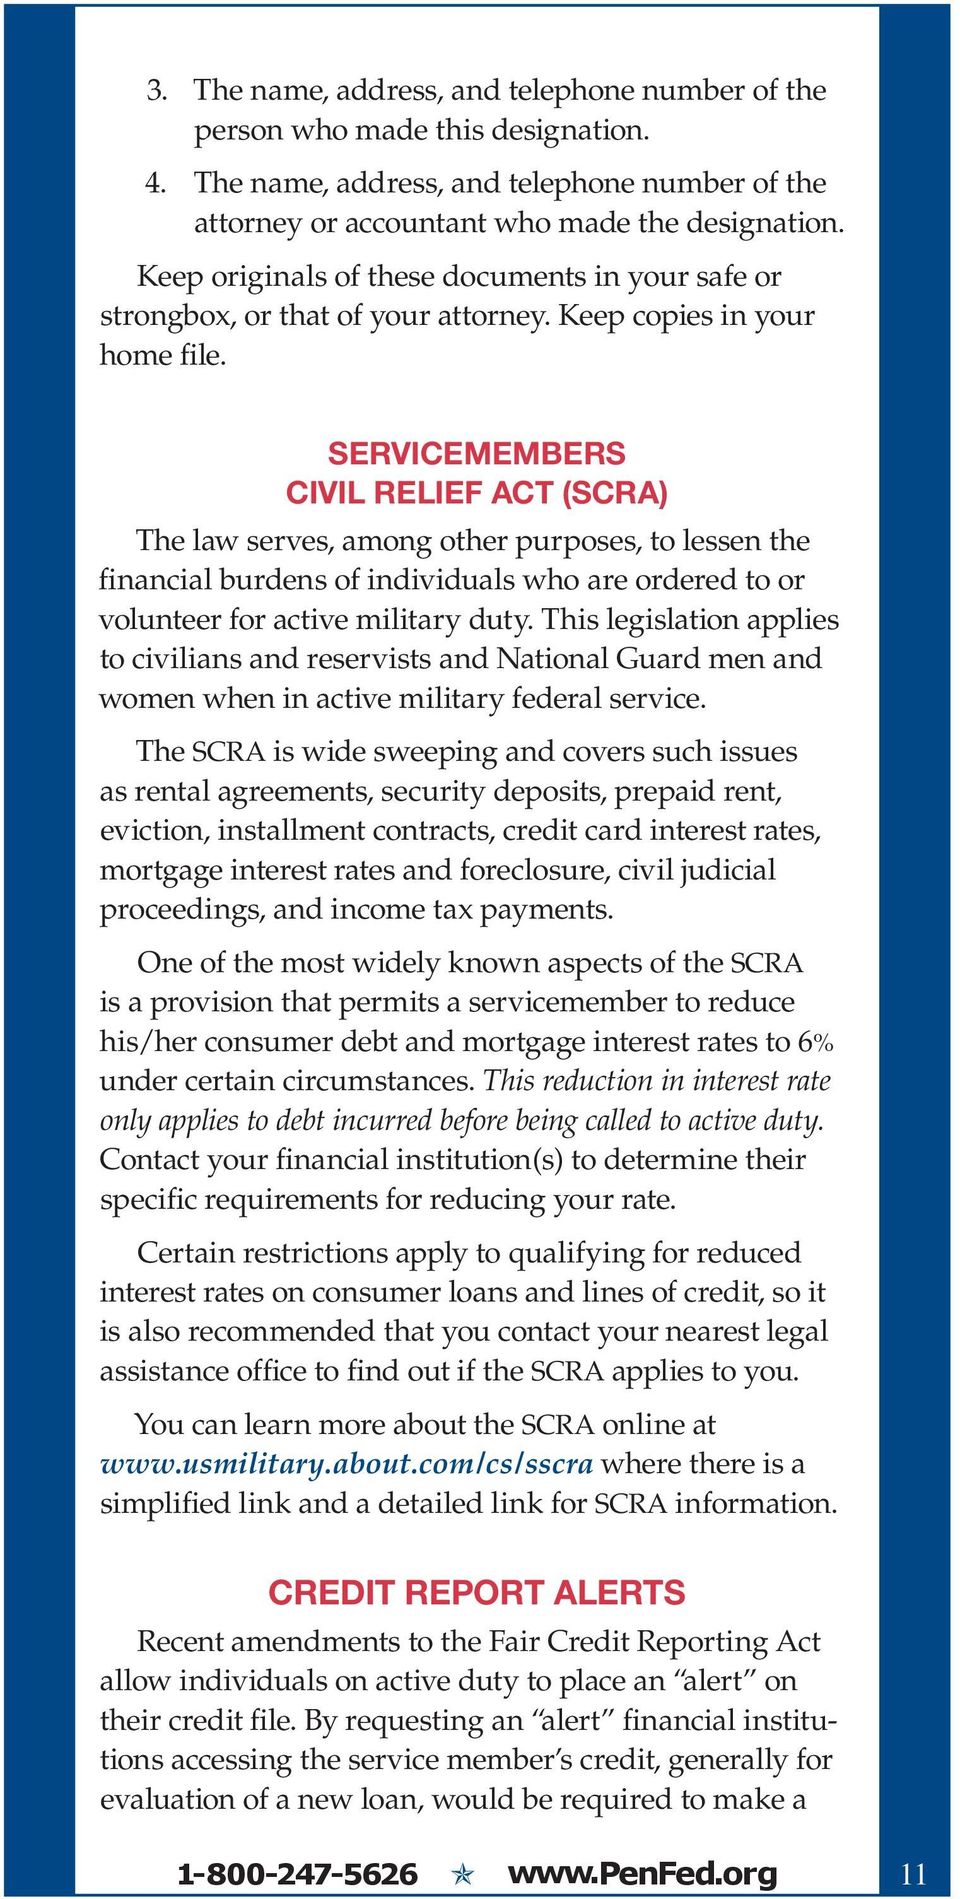 Servicemembers Civil Relief Act (SCRA) The law serves, among other purposes, to lessen the financial burdens of individuals who are ordered to or volunteer for active military duty.